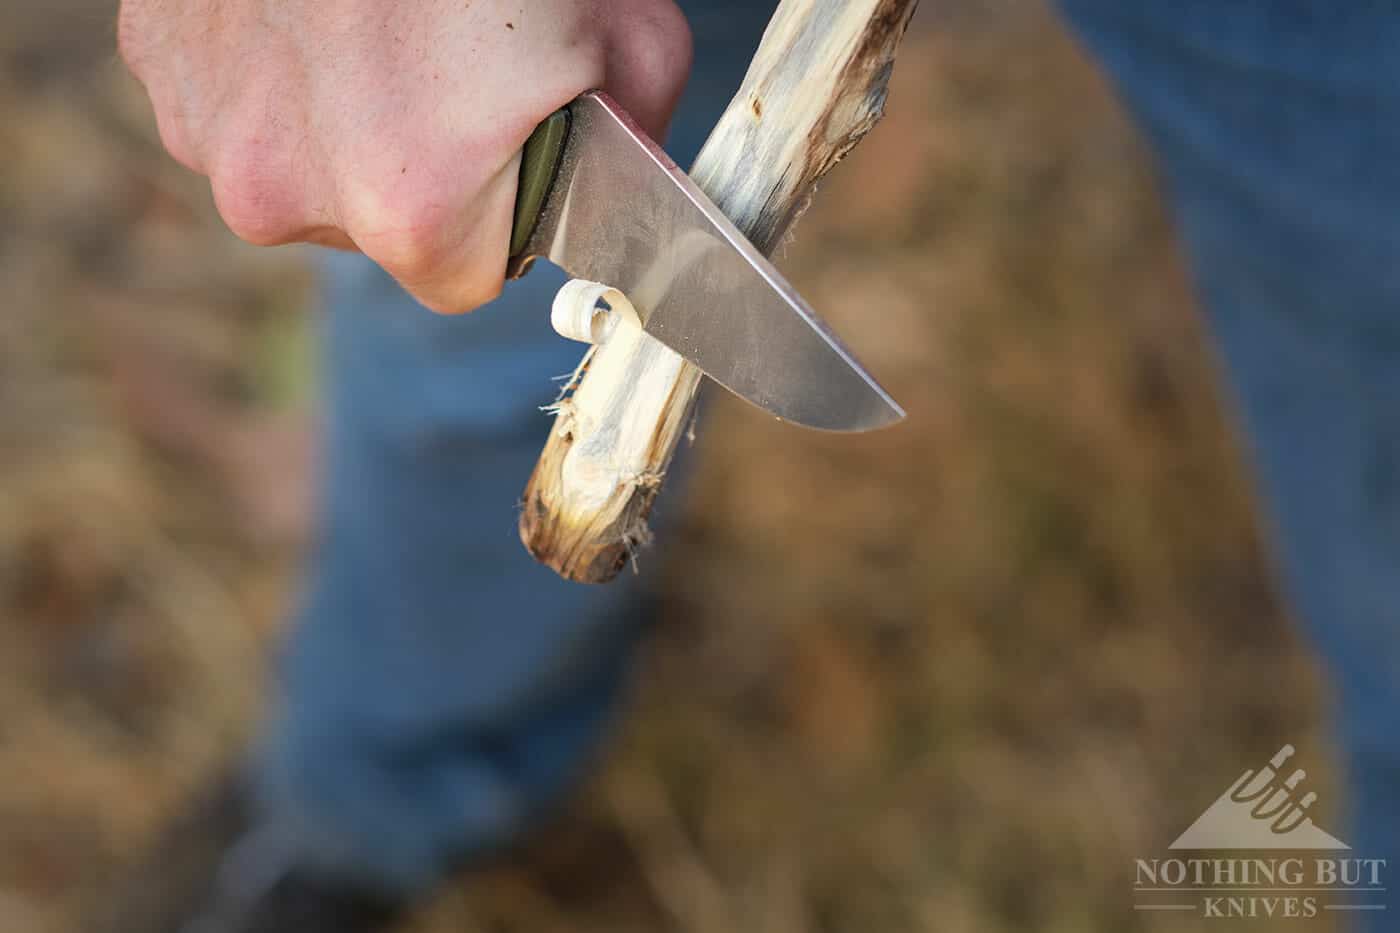 https://www.nothingbutknives.com/wp-content/uploads/2020/09/Carving-With-The-Off-Grid-Rhino-Knife.jpg